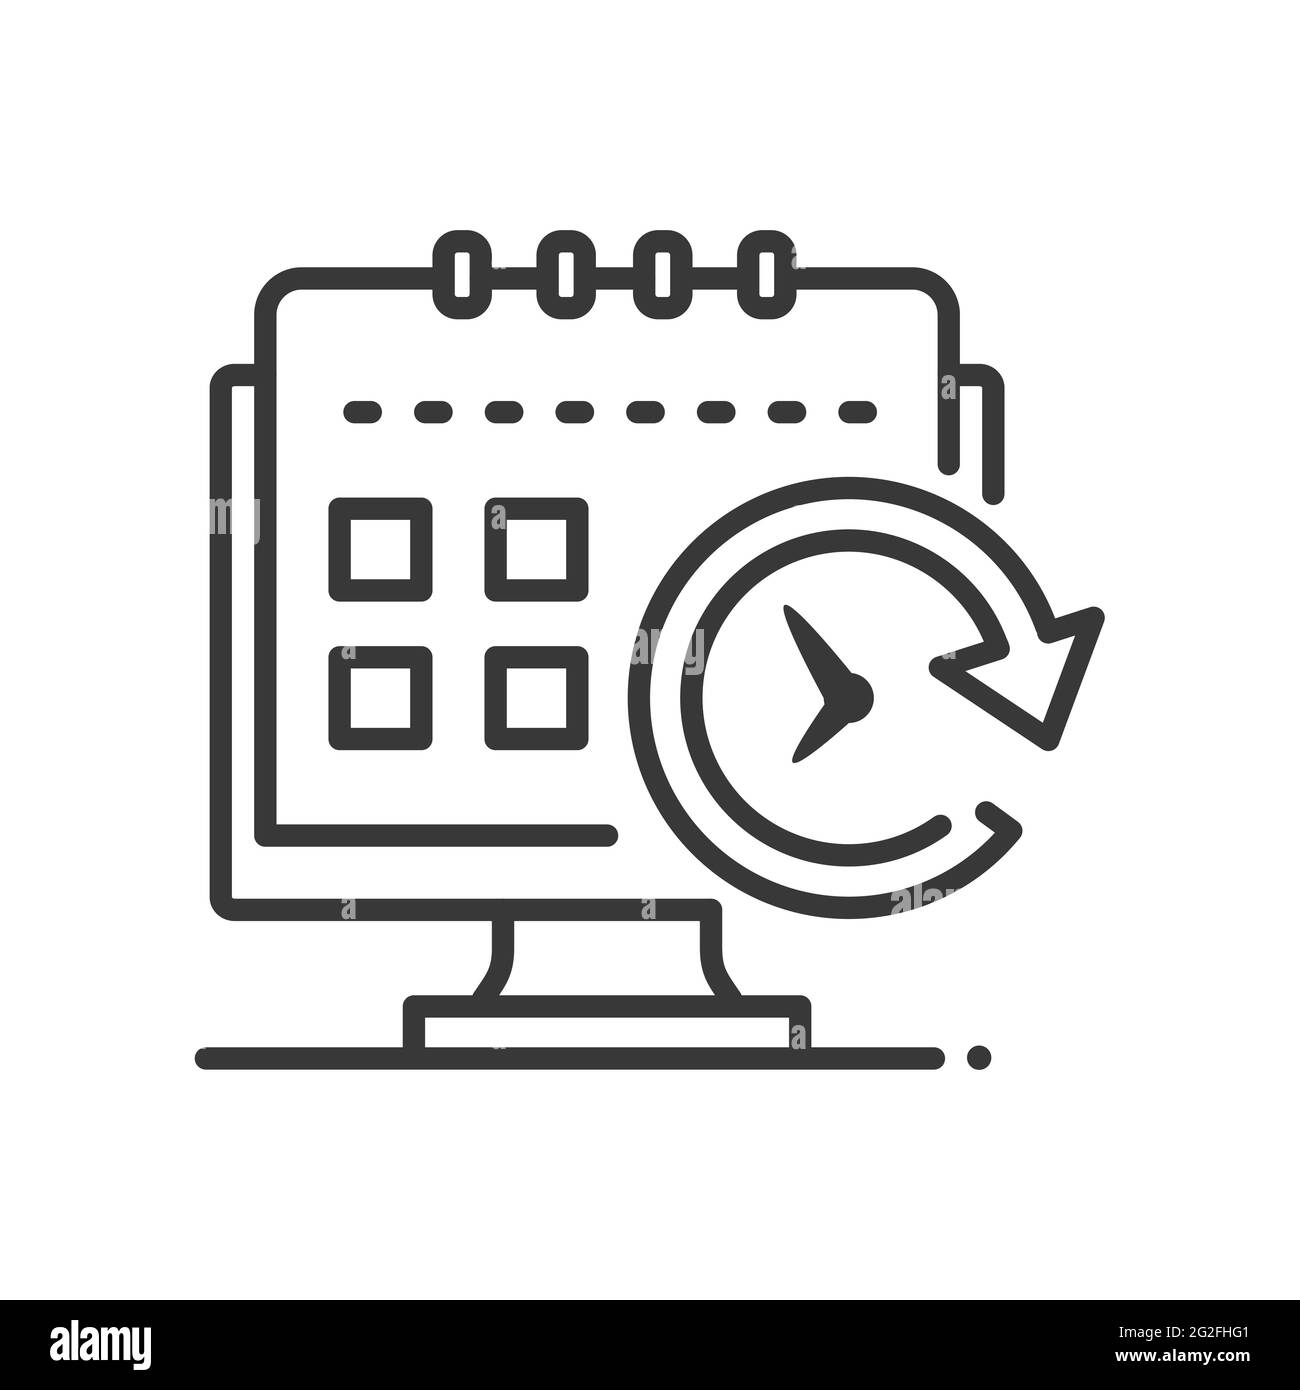 Planning - vector line design single isolated icon on white background. High quality black pictogram. Image of a calendar and clock. Time management, Stock Vector